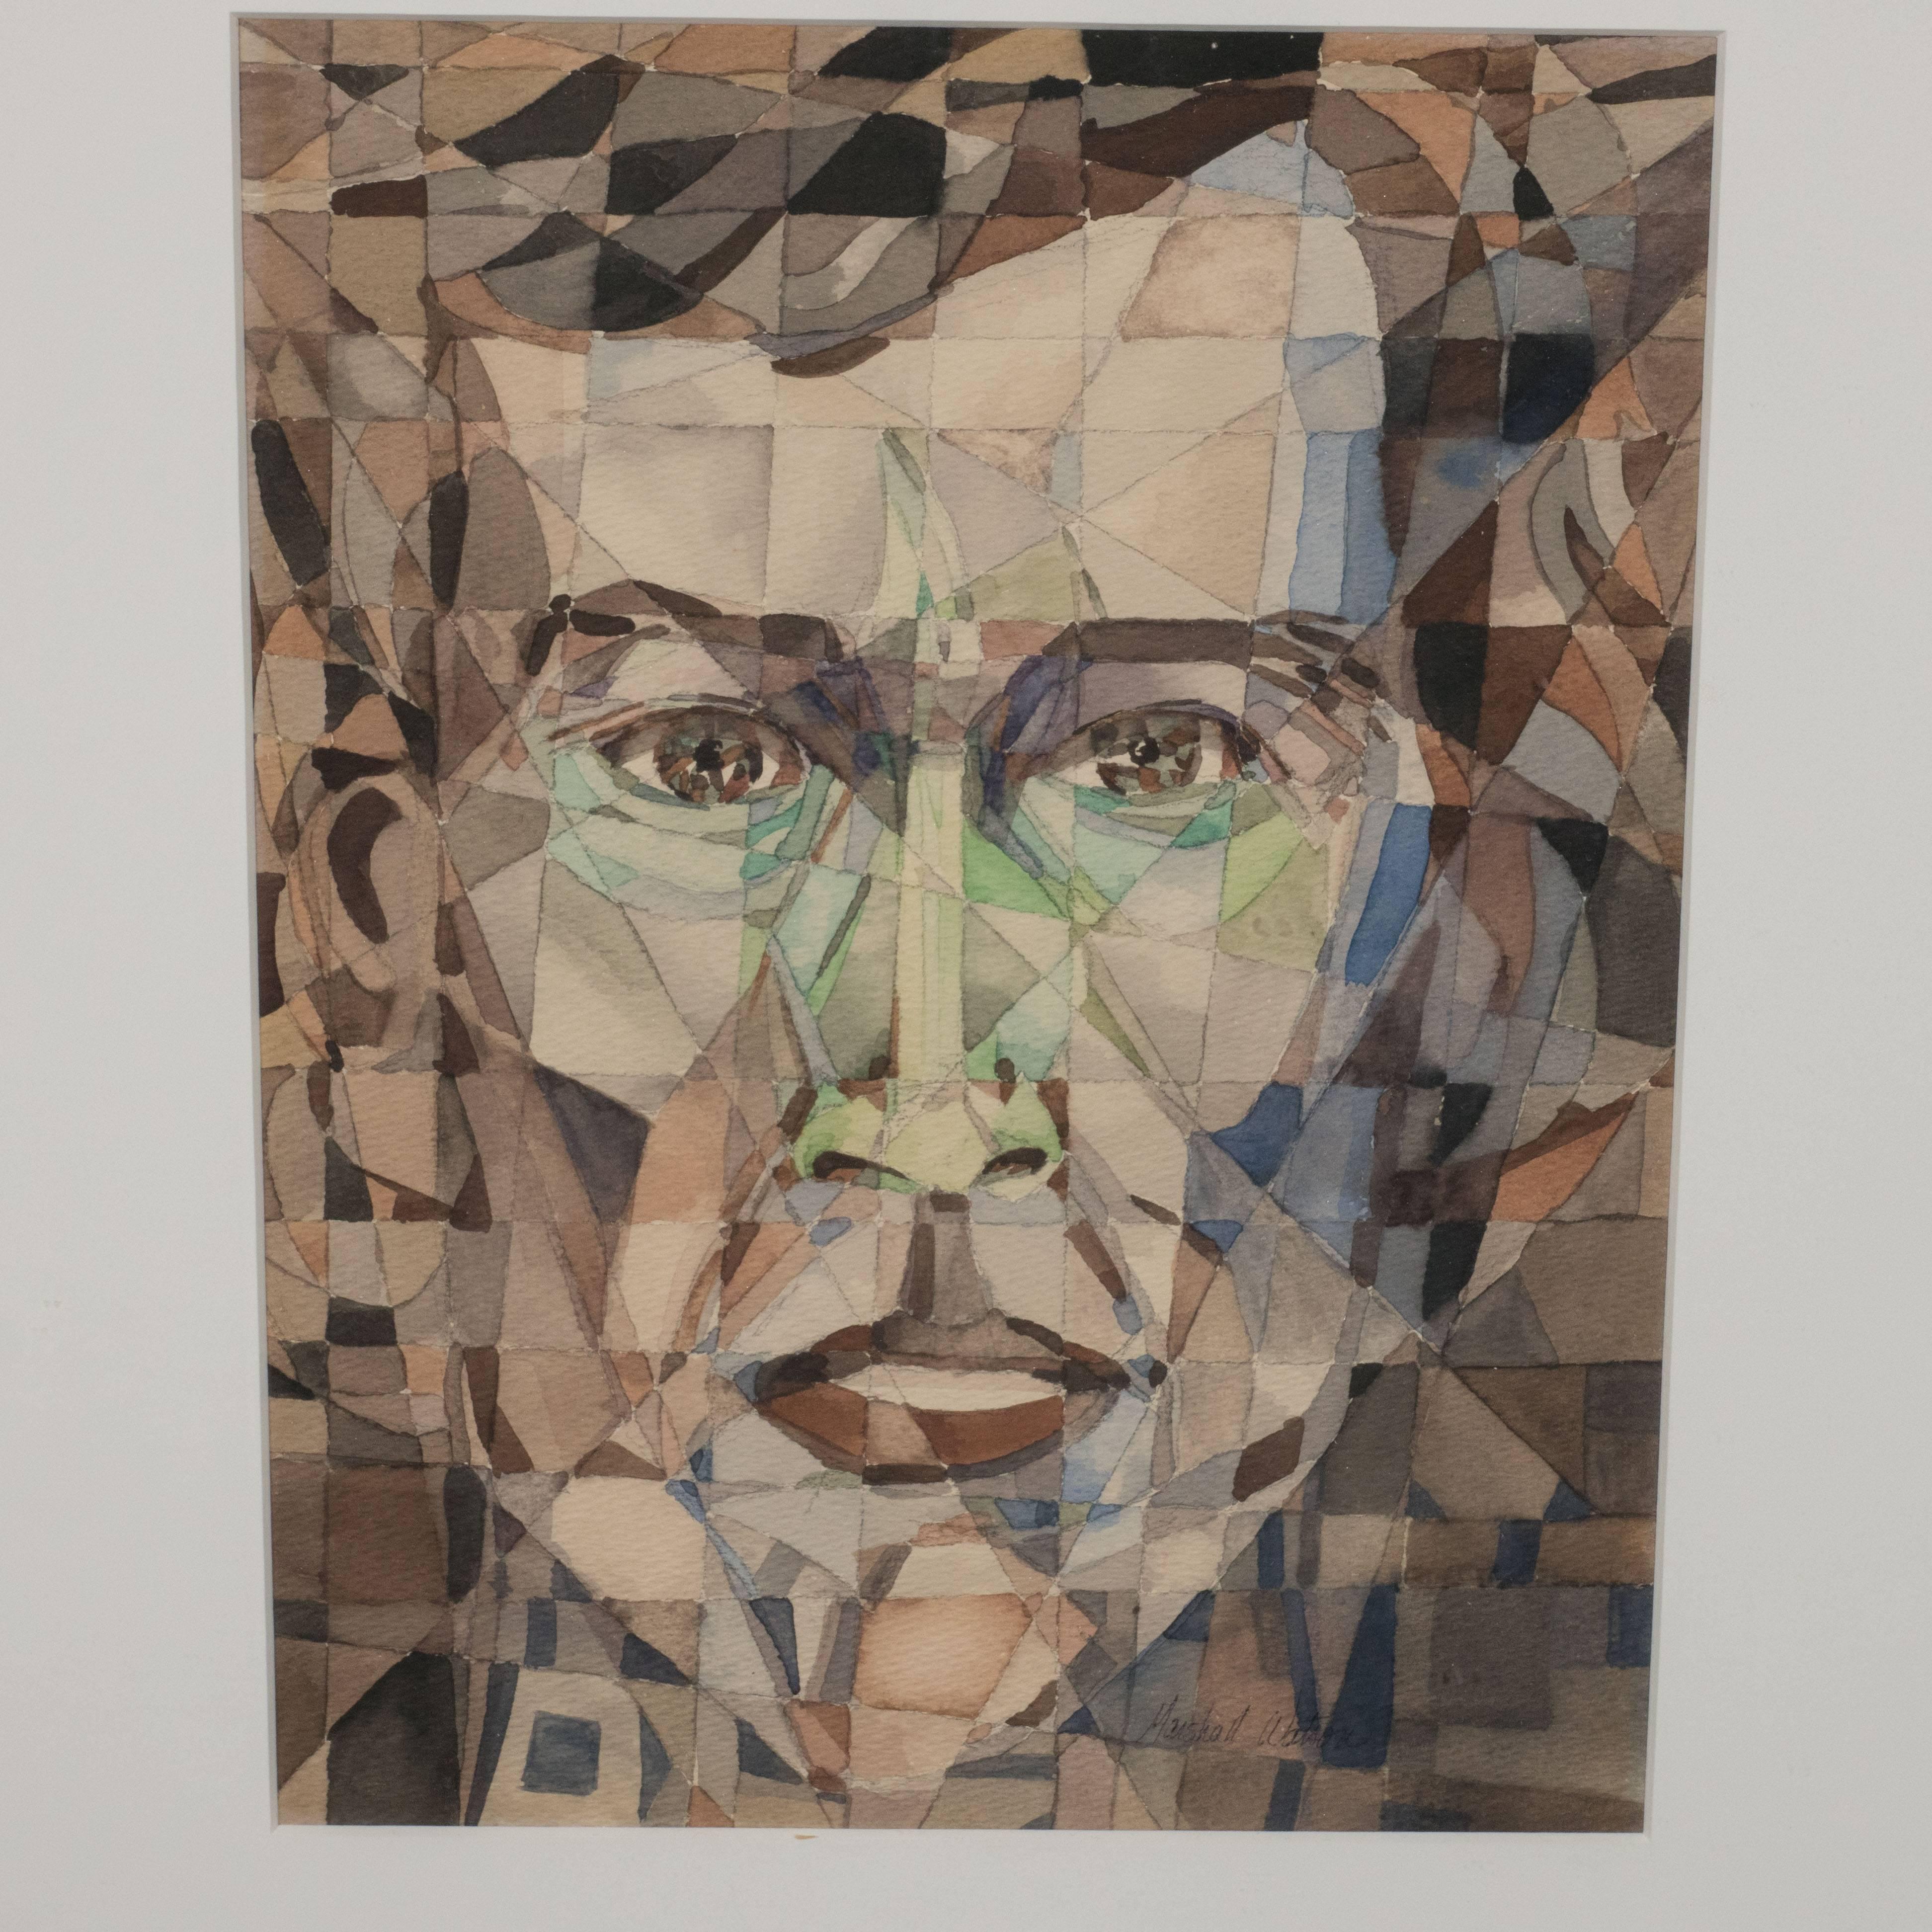 This modernist abstract portrait- rendered in ink, watercolor, and pencil- features an abundance of intersecting color planes that collectively form a man's face. It was created by the critically acclaimed Manhattan-based designer/Fine artist,